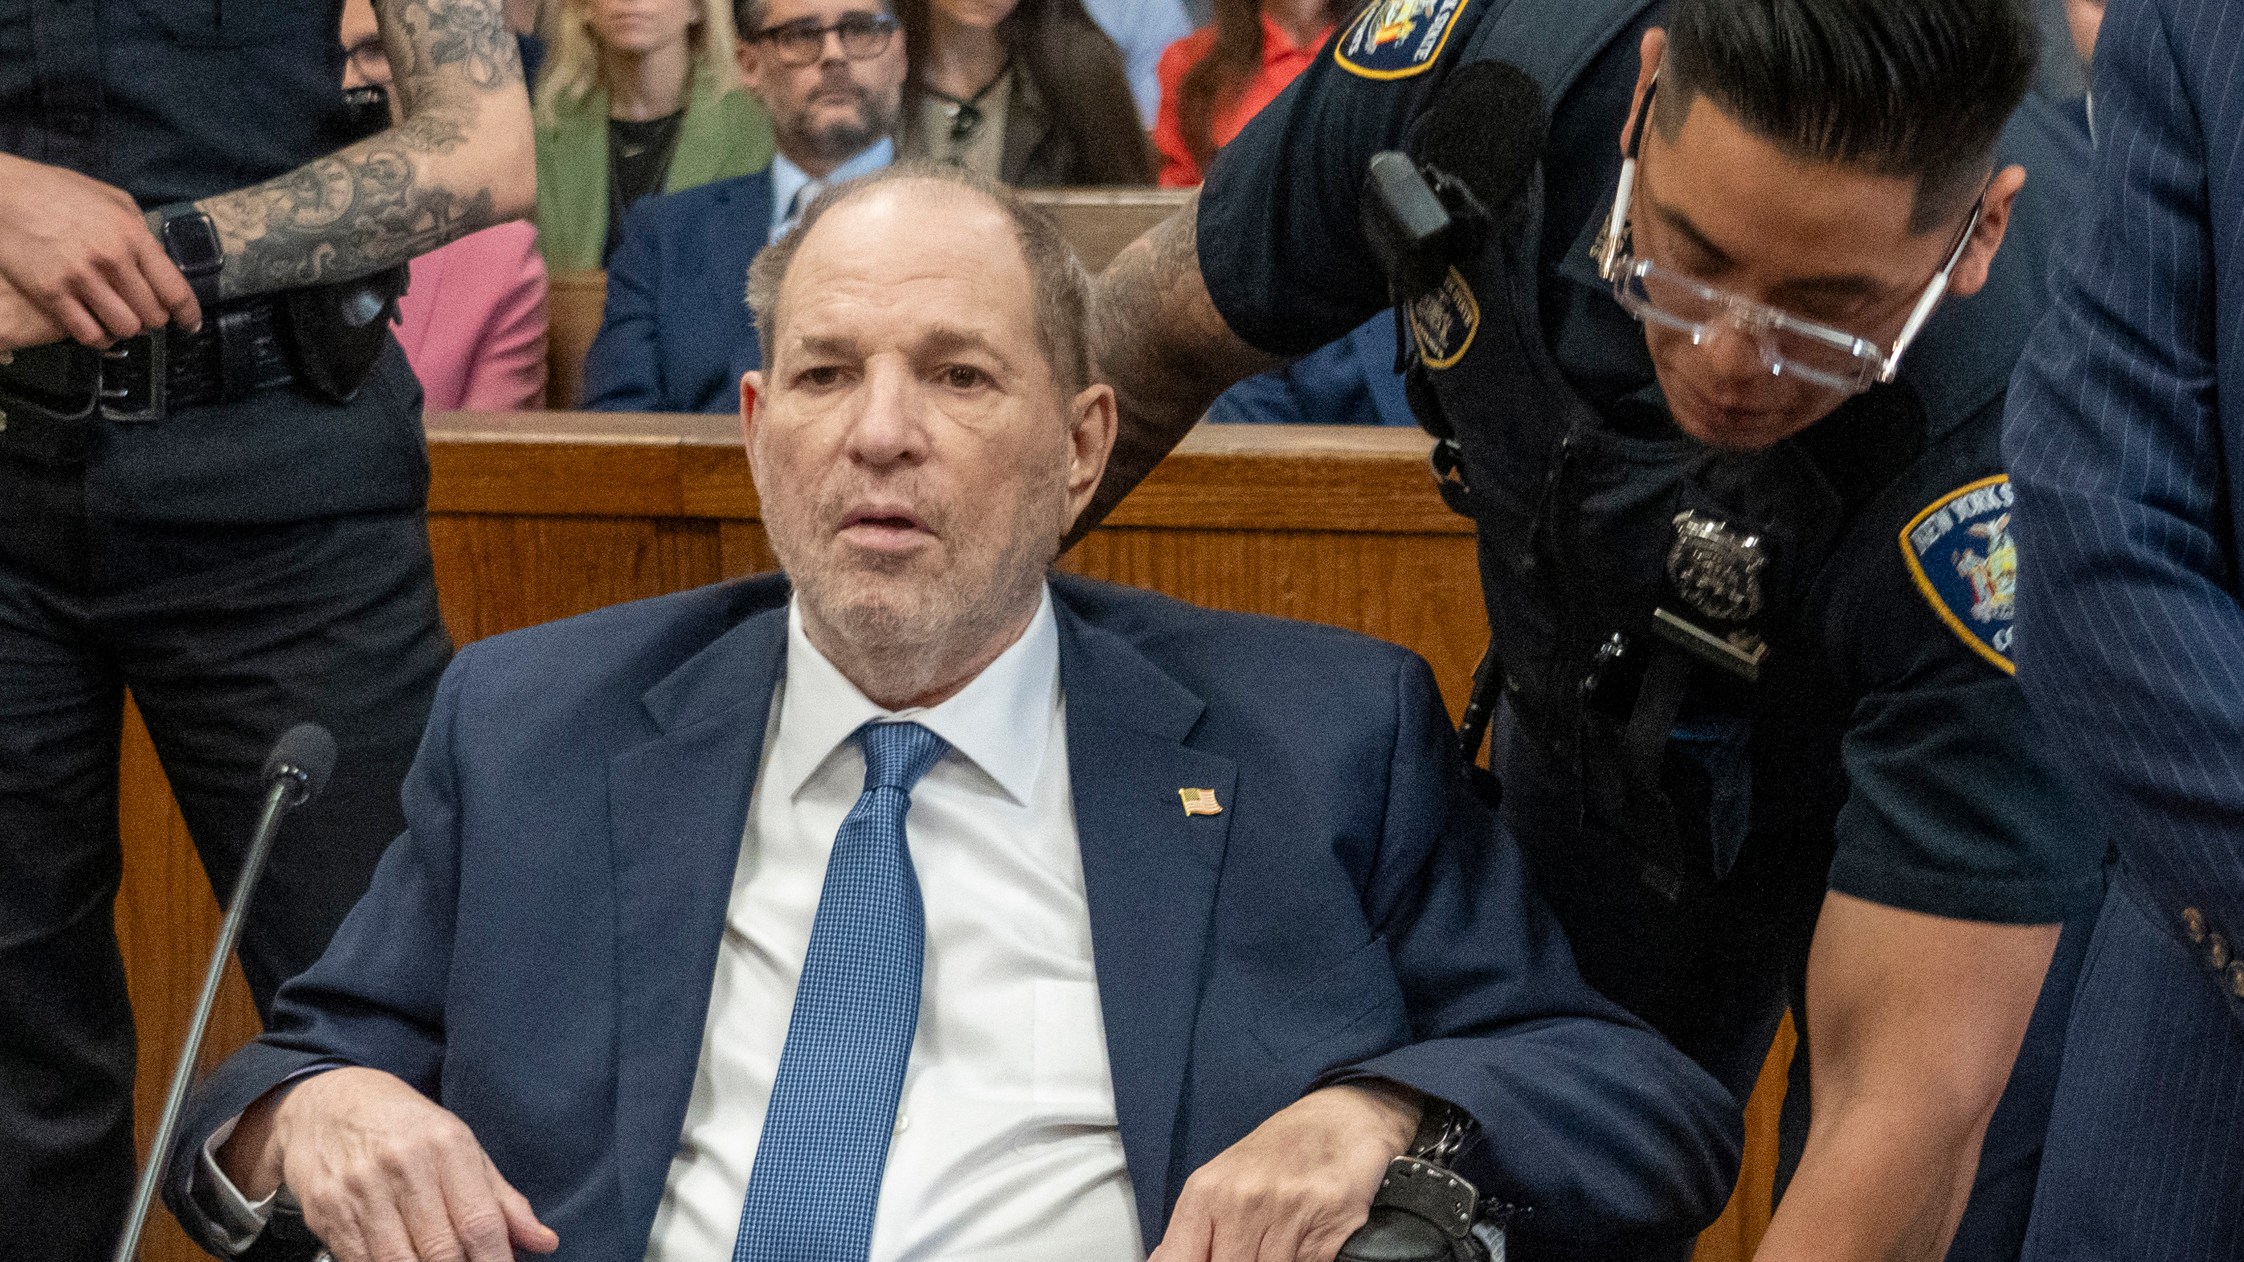 Harvey Weinstein attended a hearing on Wednesday in the same Manhattan criminal court where Donald Trump is being tried for electoral finance violations